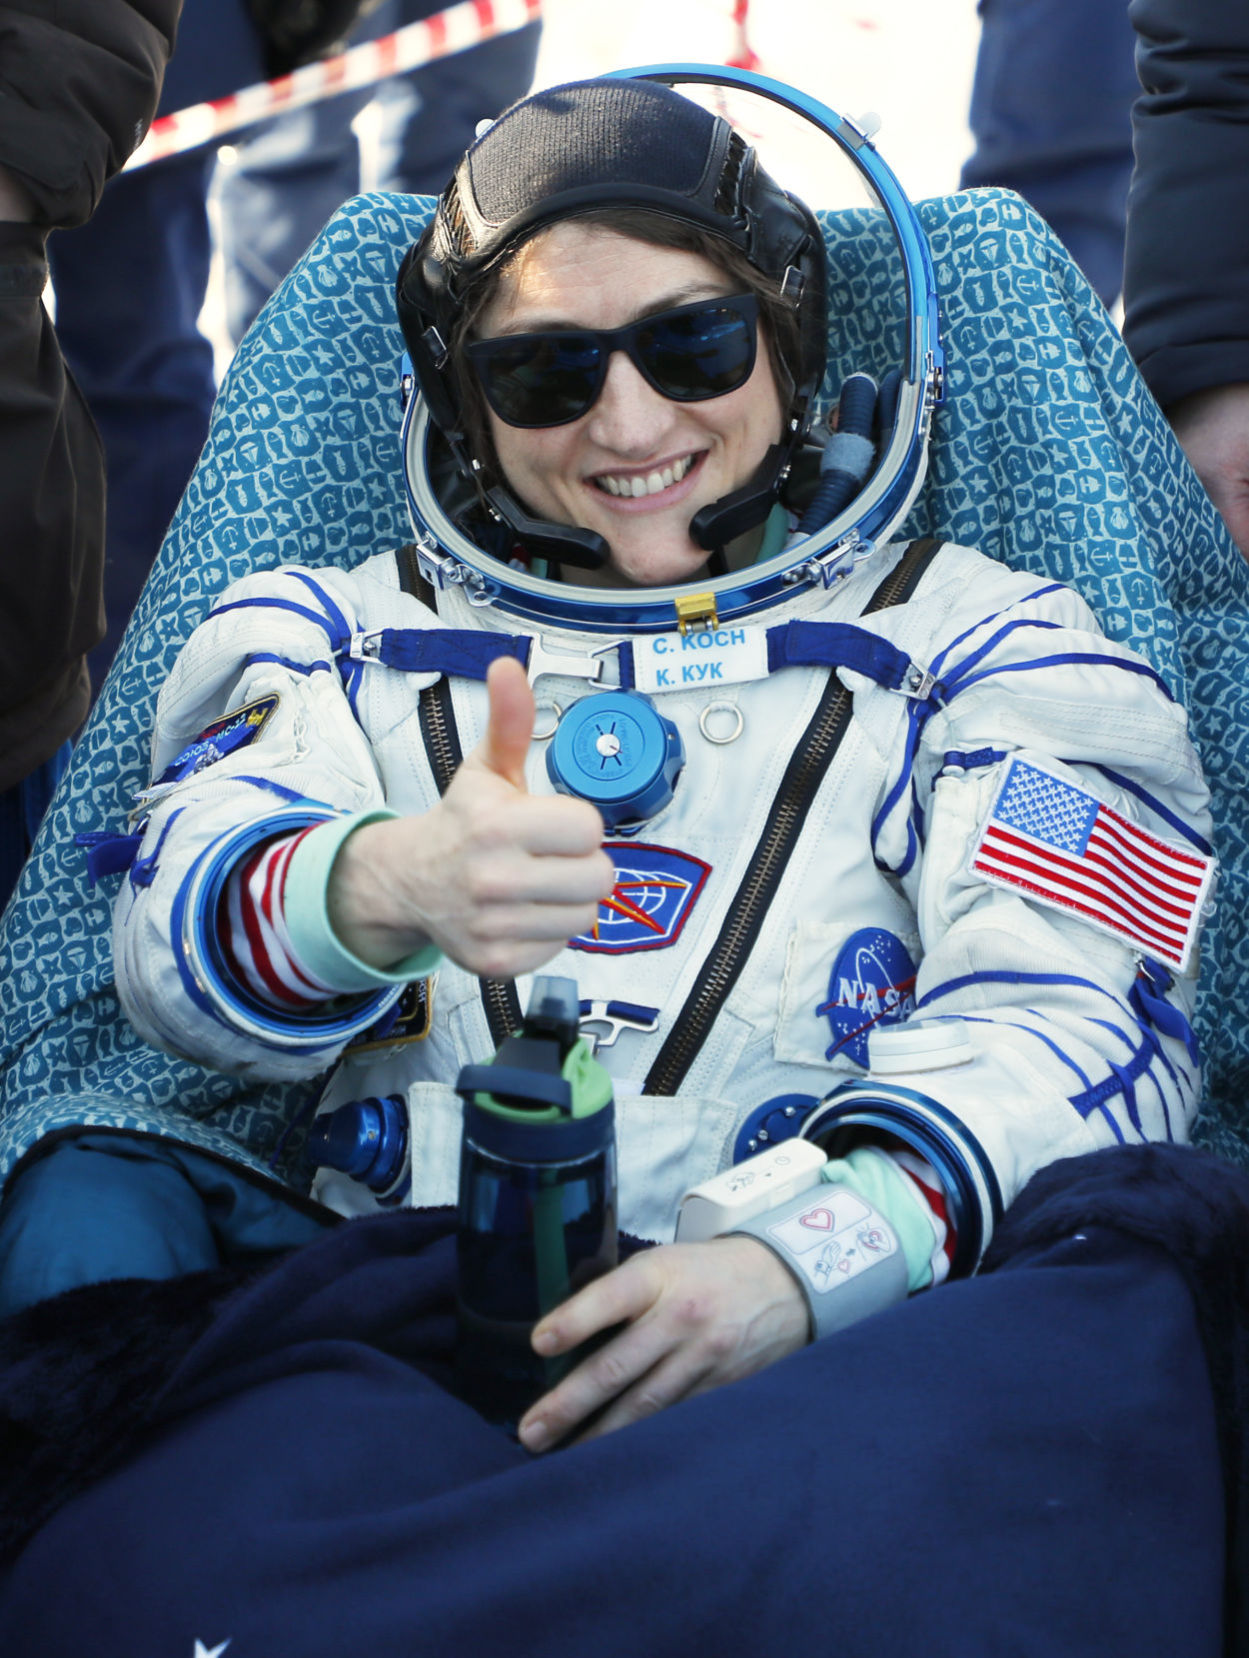 Montana astronaut who set record for longest spaceflight by woman safely back from space